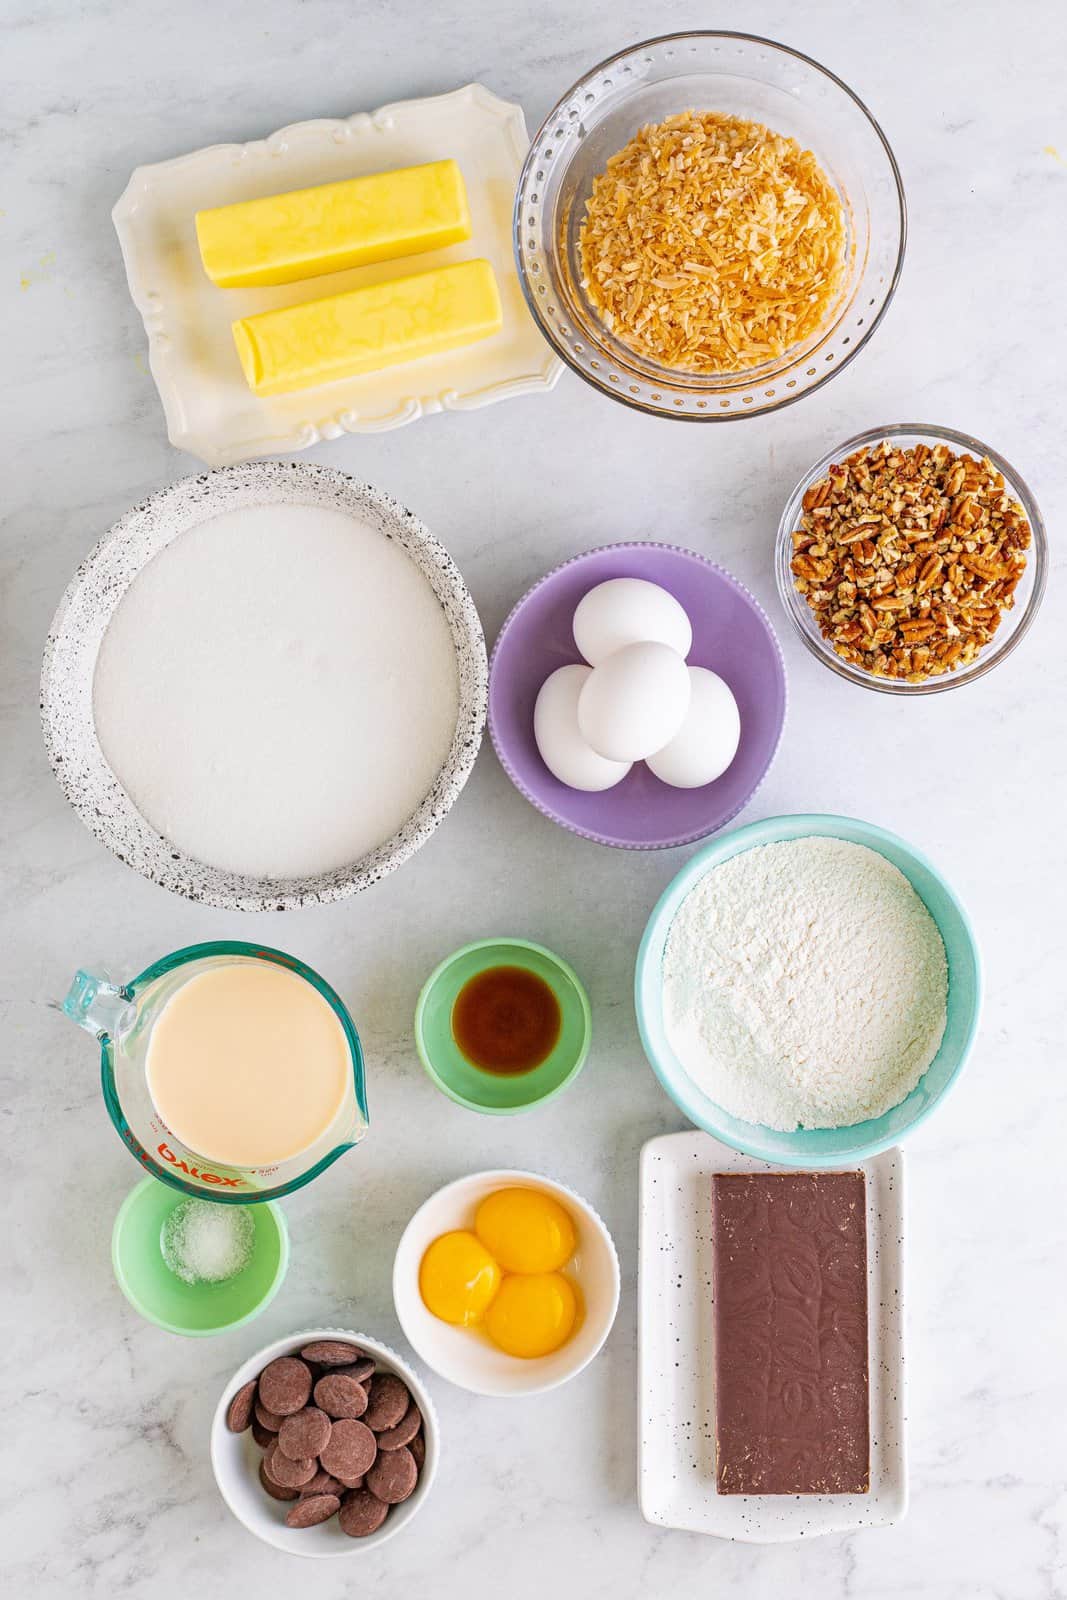 Ingredients needed: salted butter, german chocolate baking bar, granulated sugar, eggs, vanilla extract, fine sea salt, all-purpose flour, evaporated milk, egg yolks, toasted coconut, chopped pecans and chocolate melting wafers.